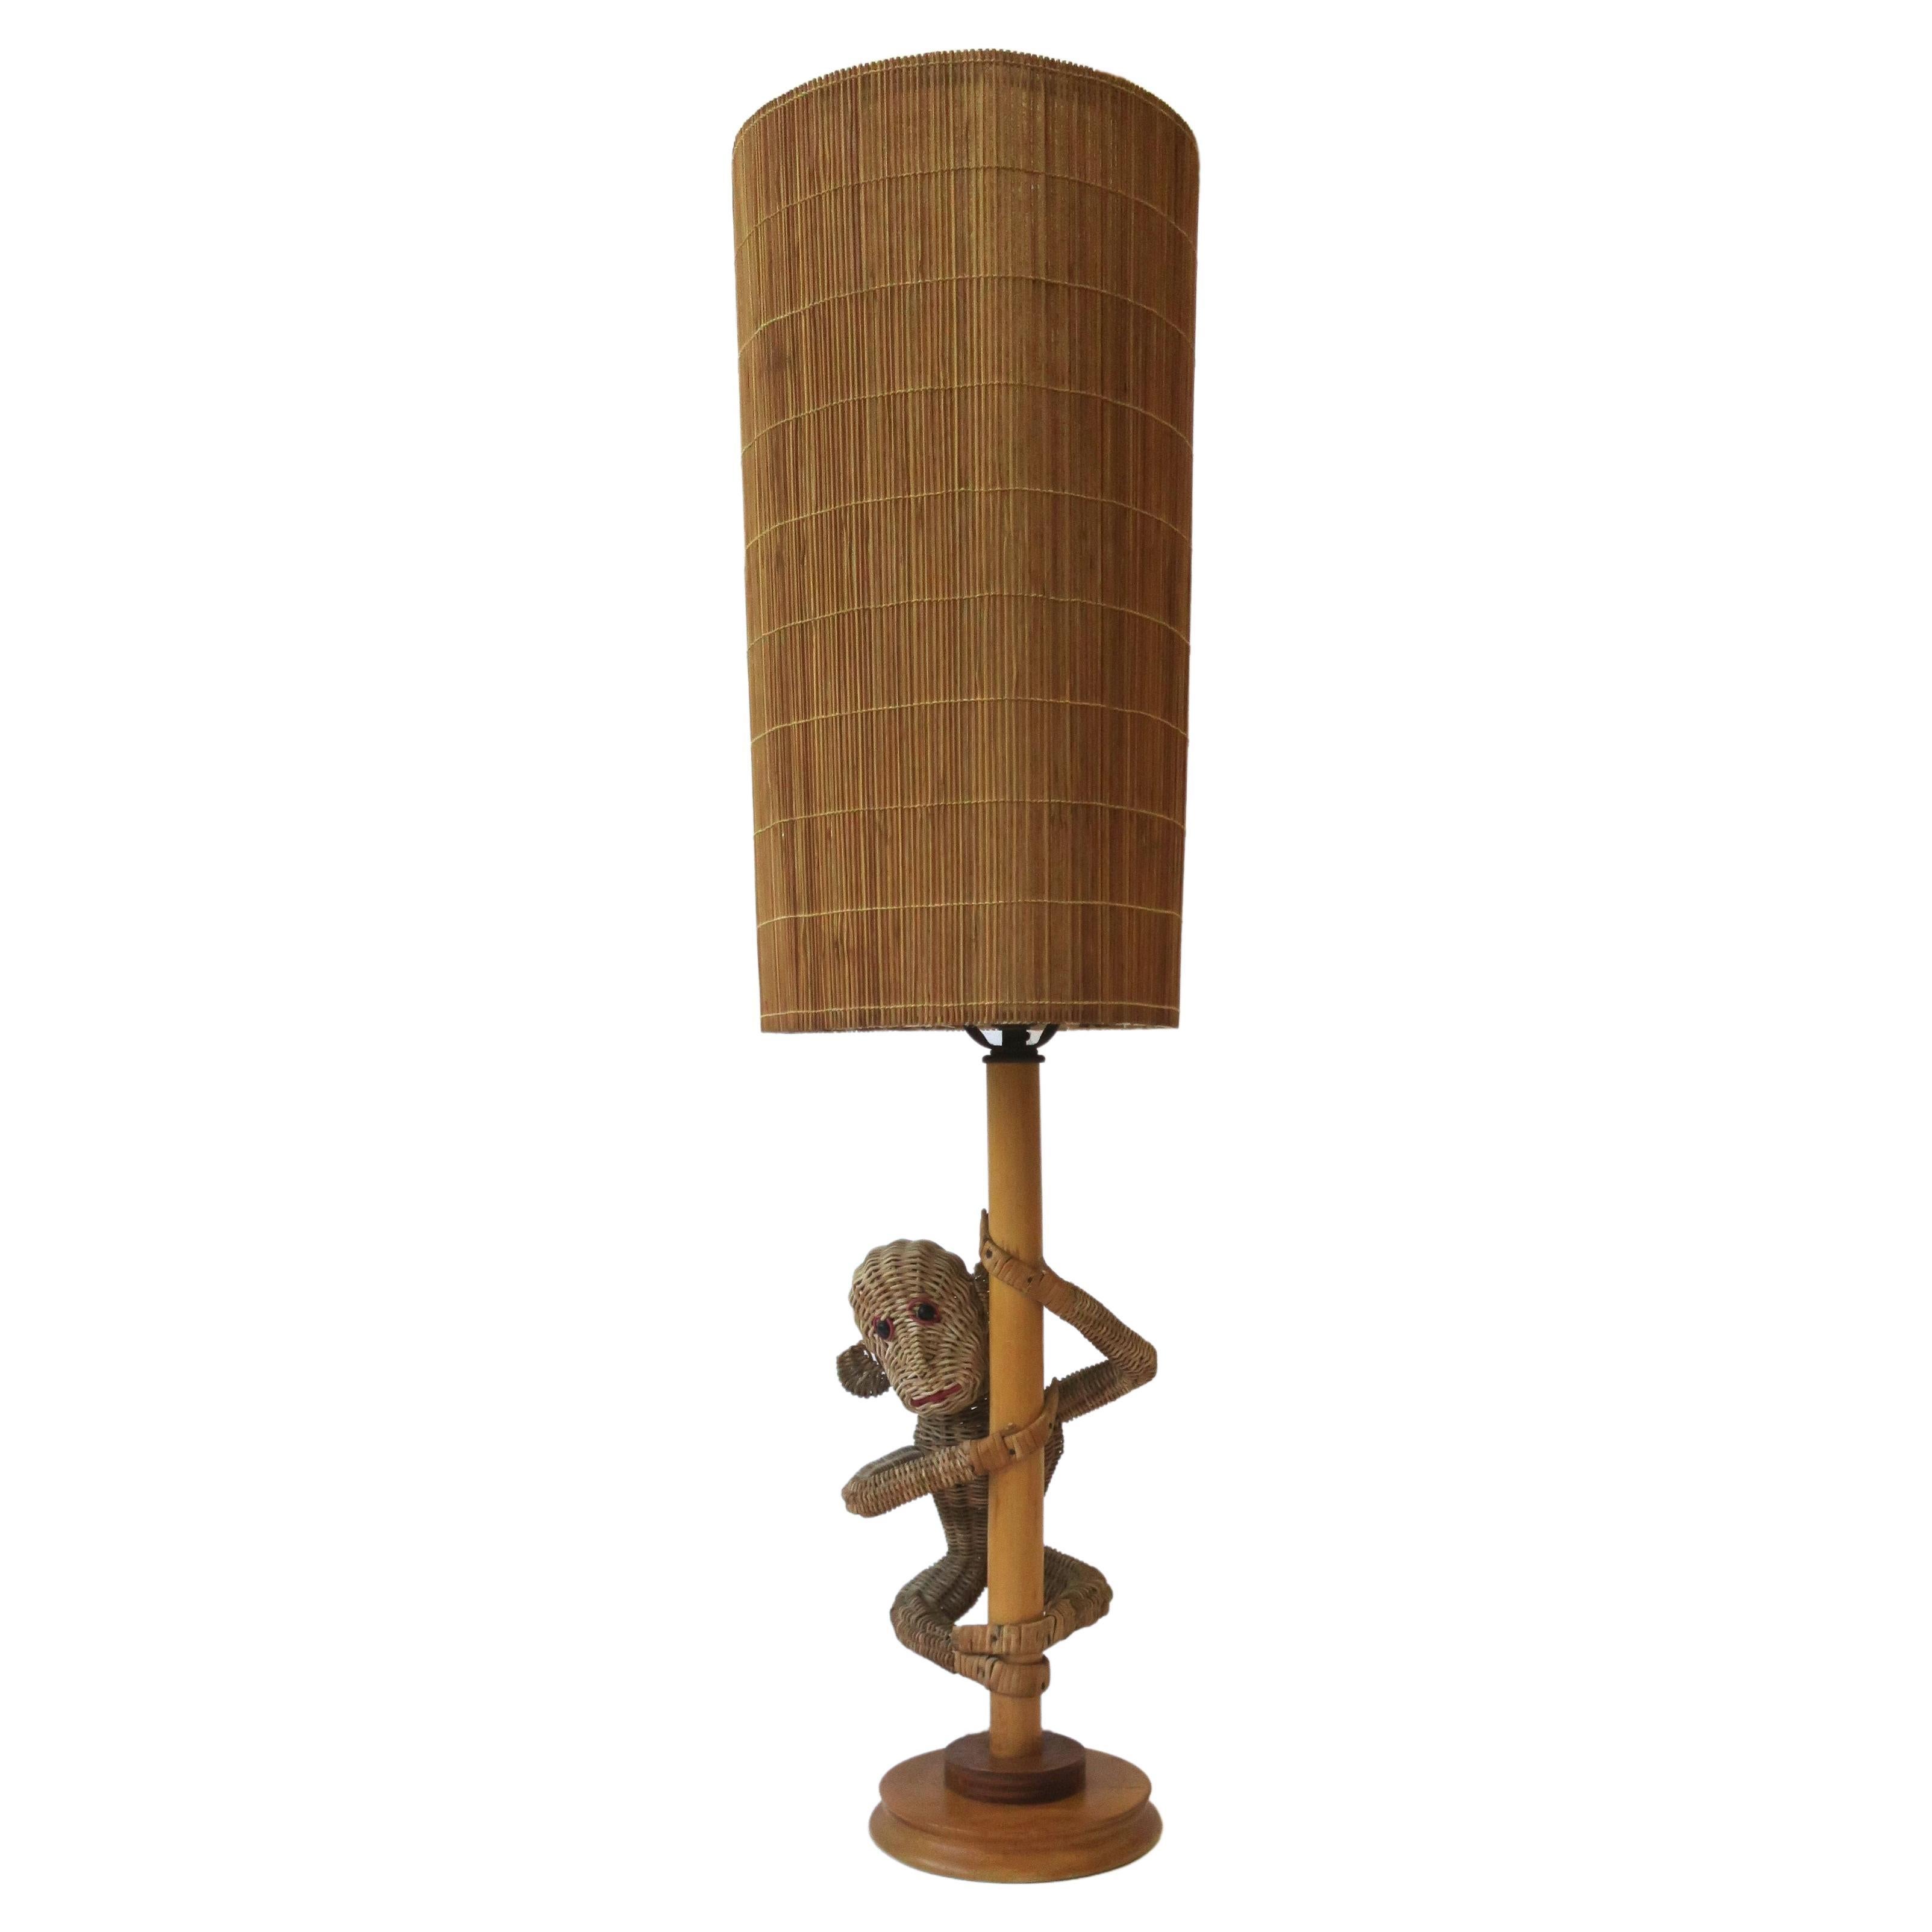 Wicker Rattan Monkey Lamp with Wicker Shade in the Lopez Style, circa 1970s For Sale